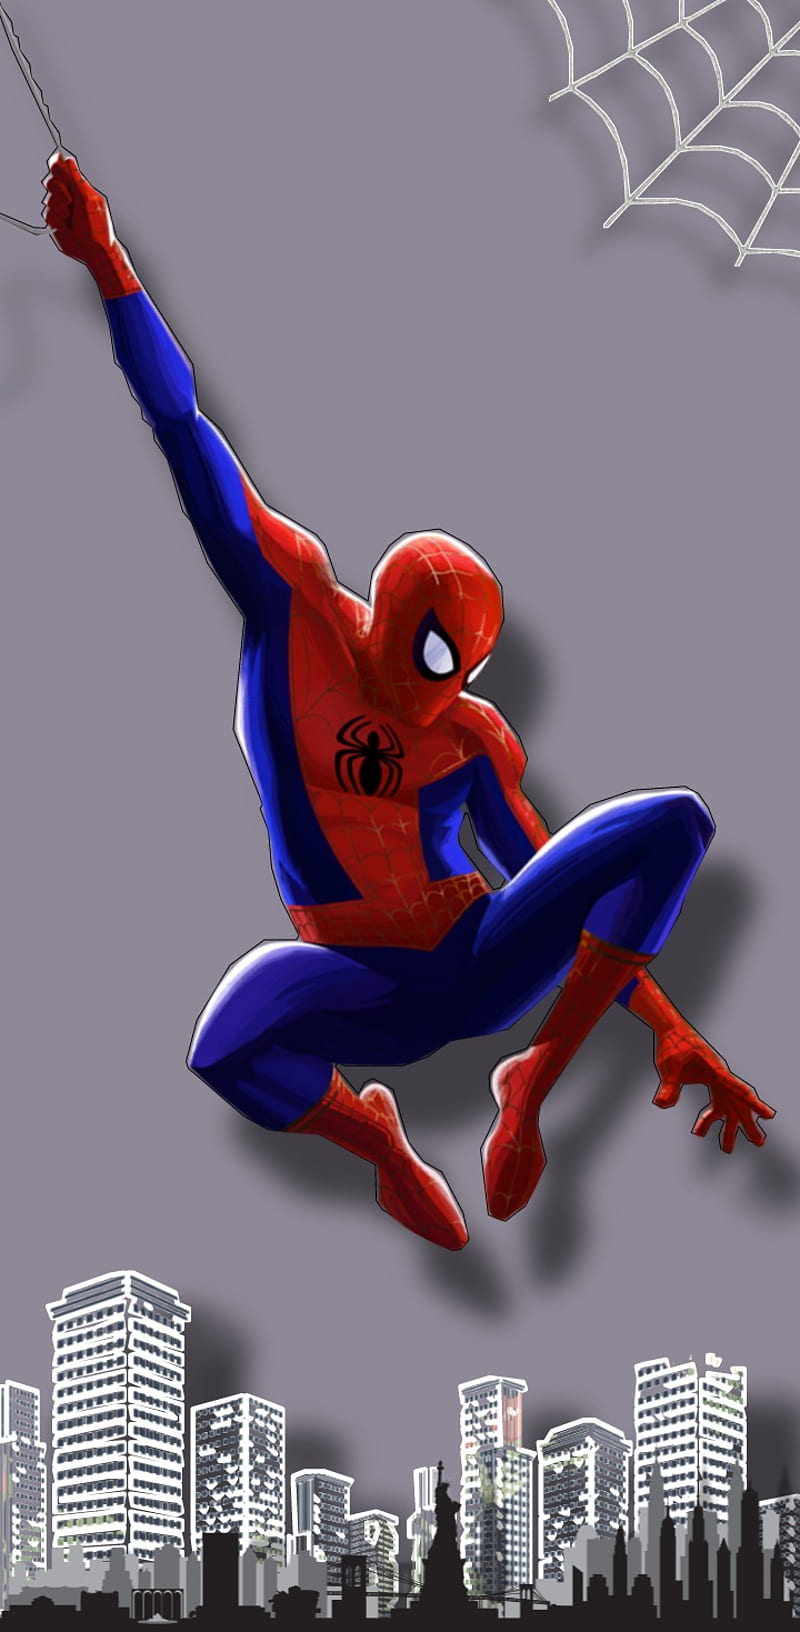 How to Draw Spiderman- Art for Beginners - YouTube